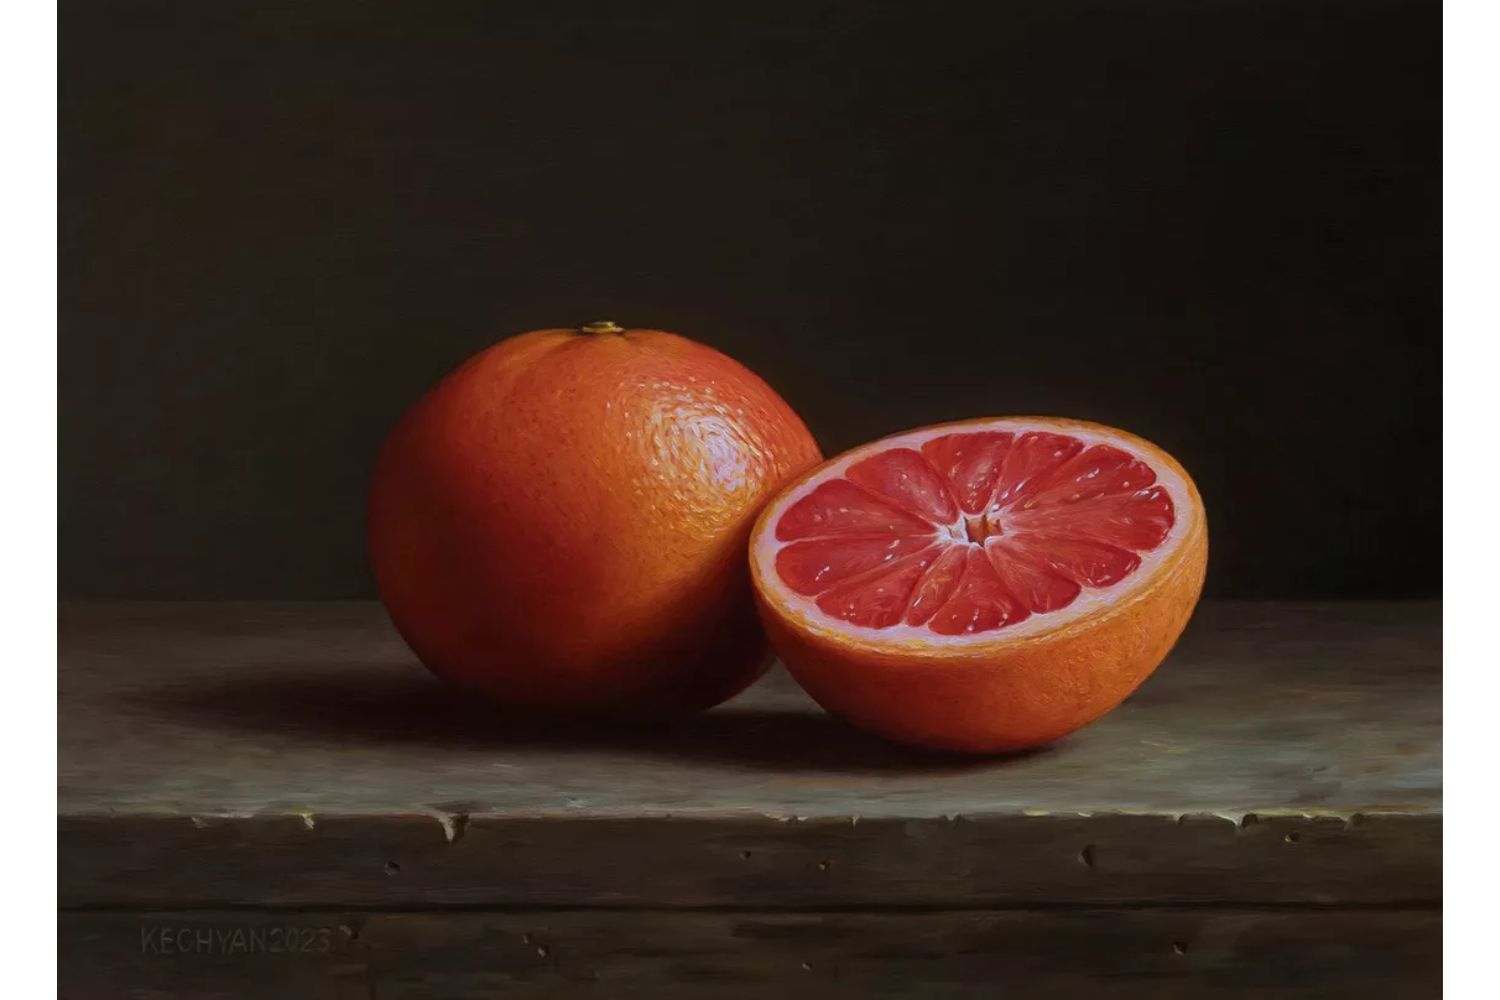 The Best Places to Buy Art Online Options: Grapefruit by Albert Kechyan